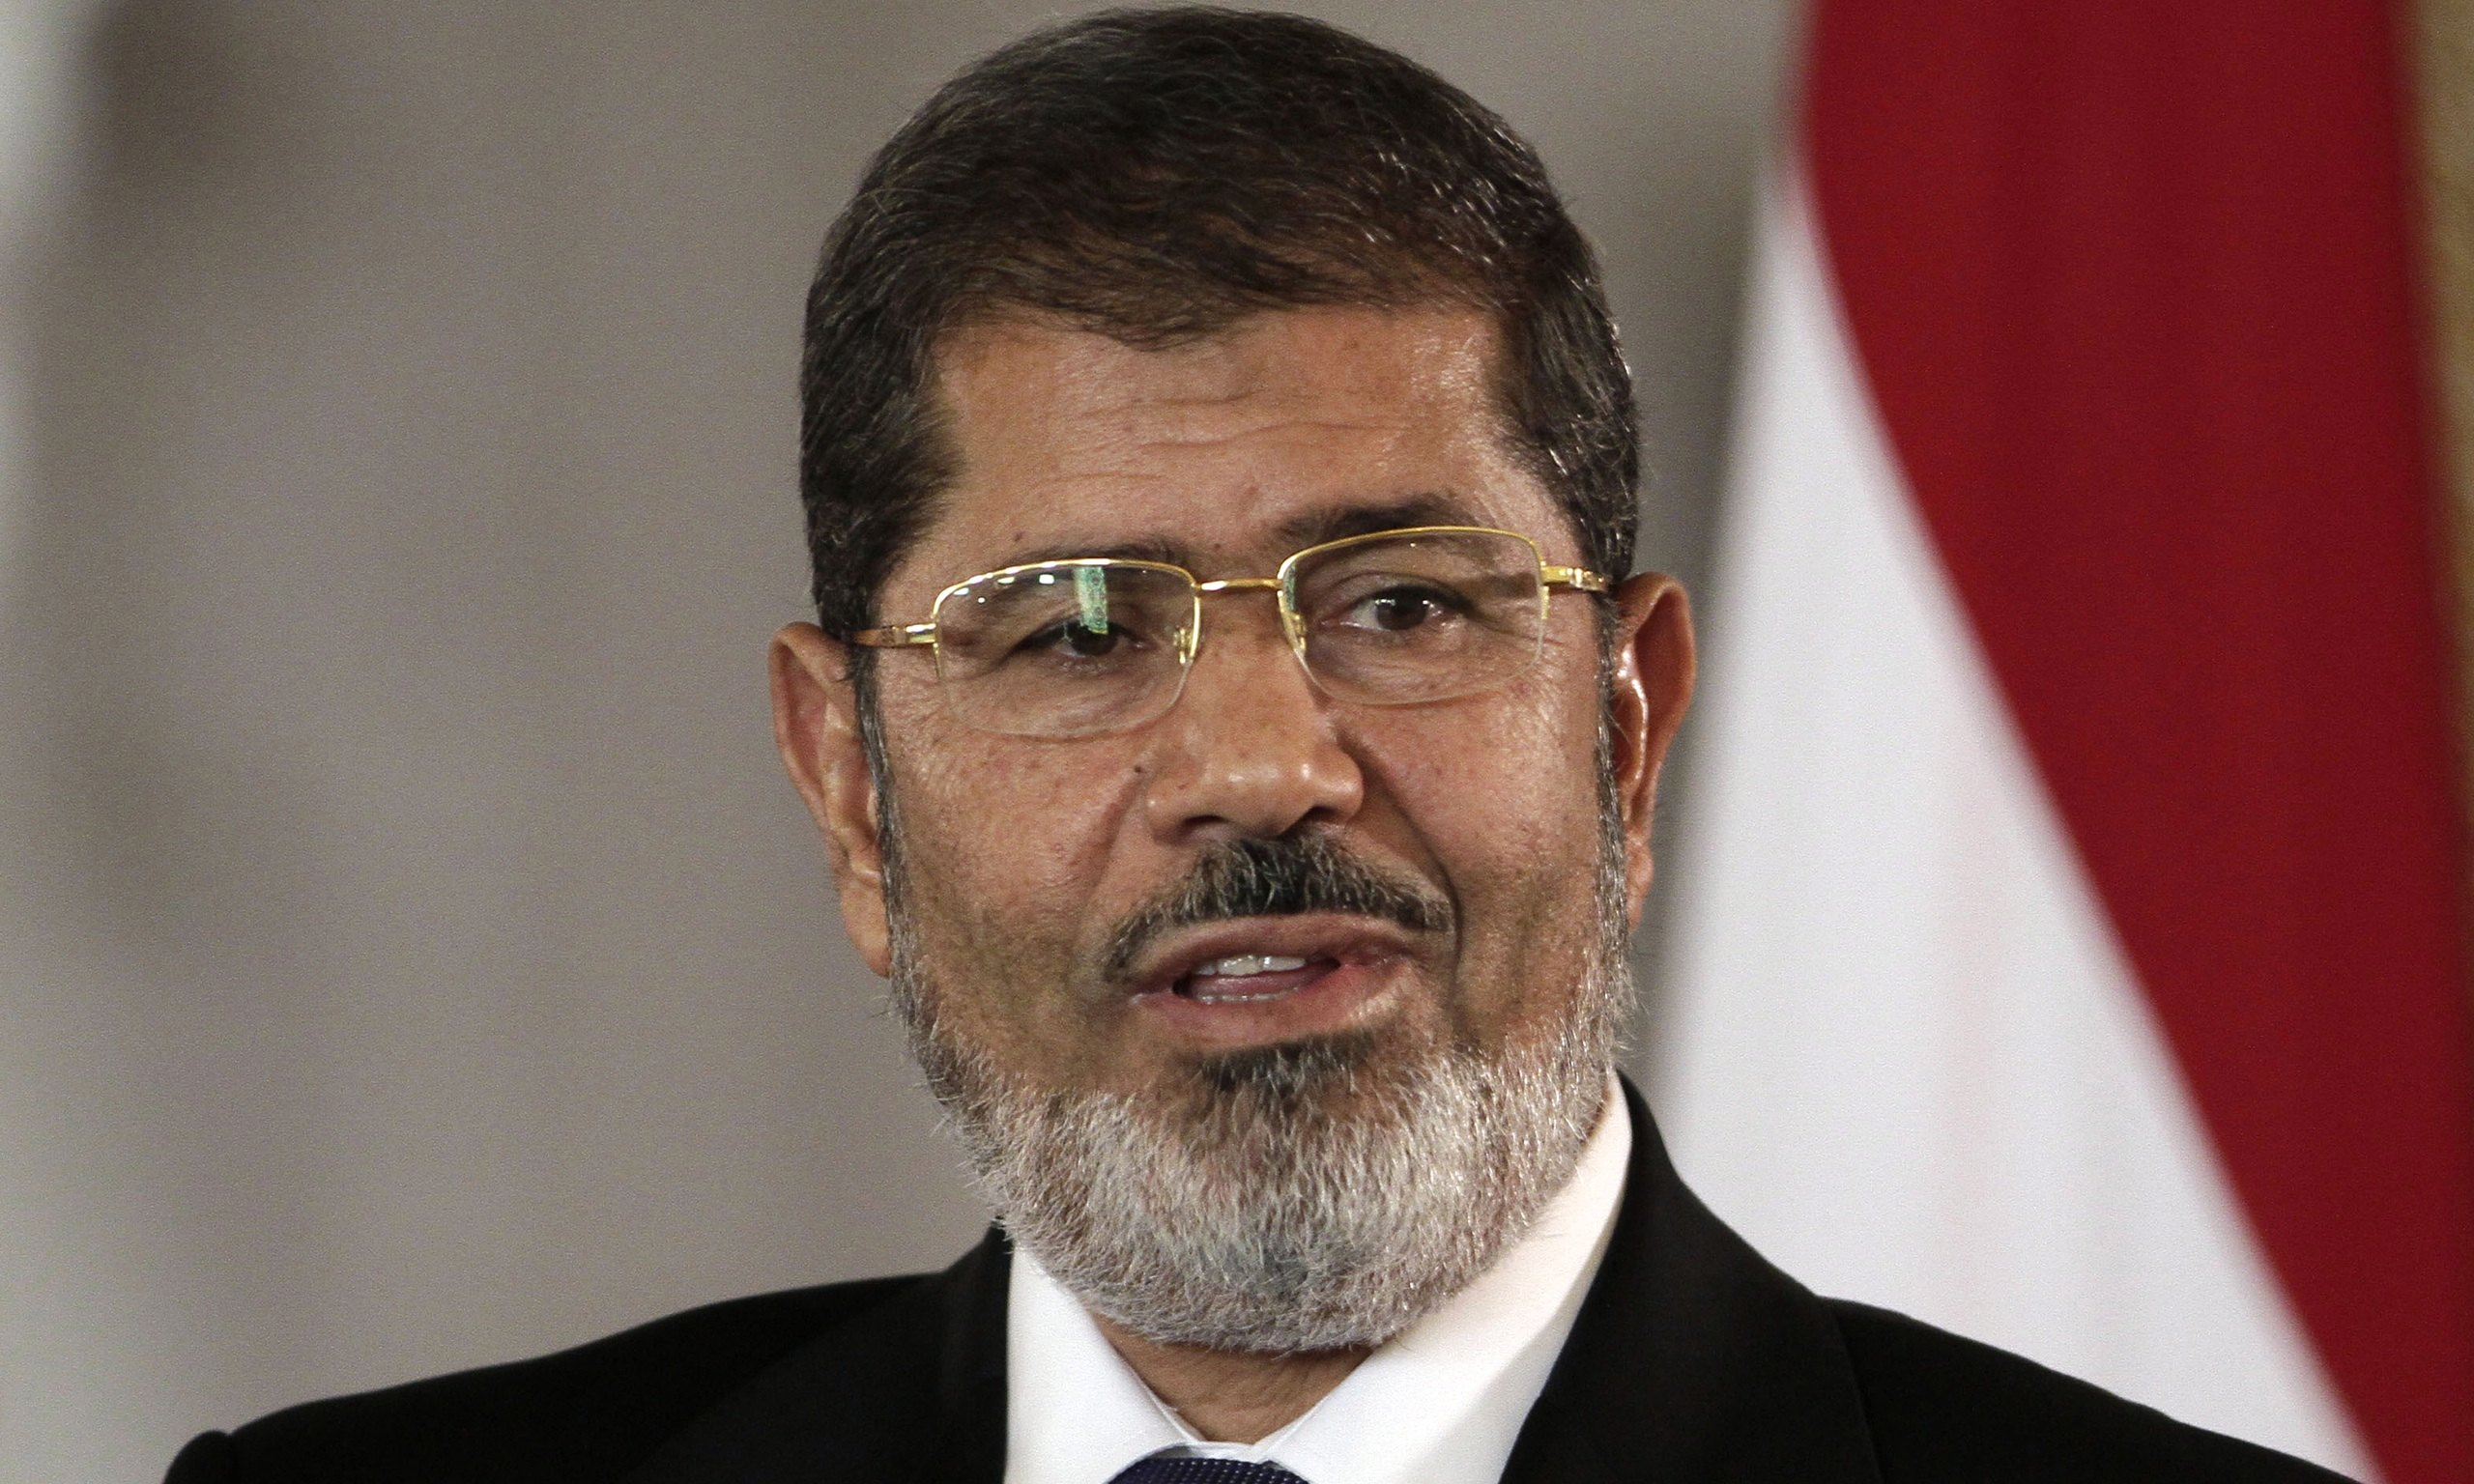 Ousted President Mohamed Morsi of Egypt in an undated photo